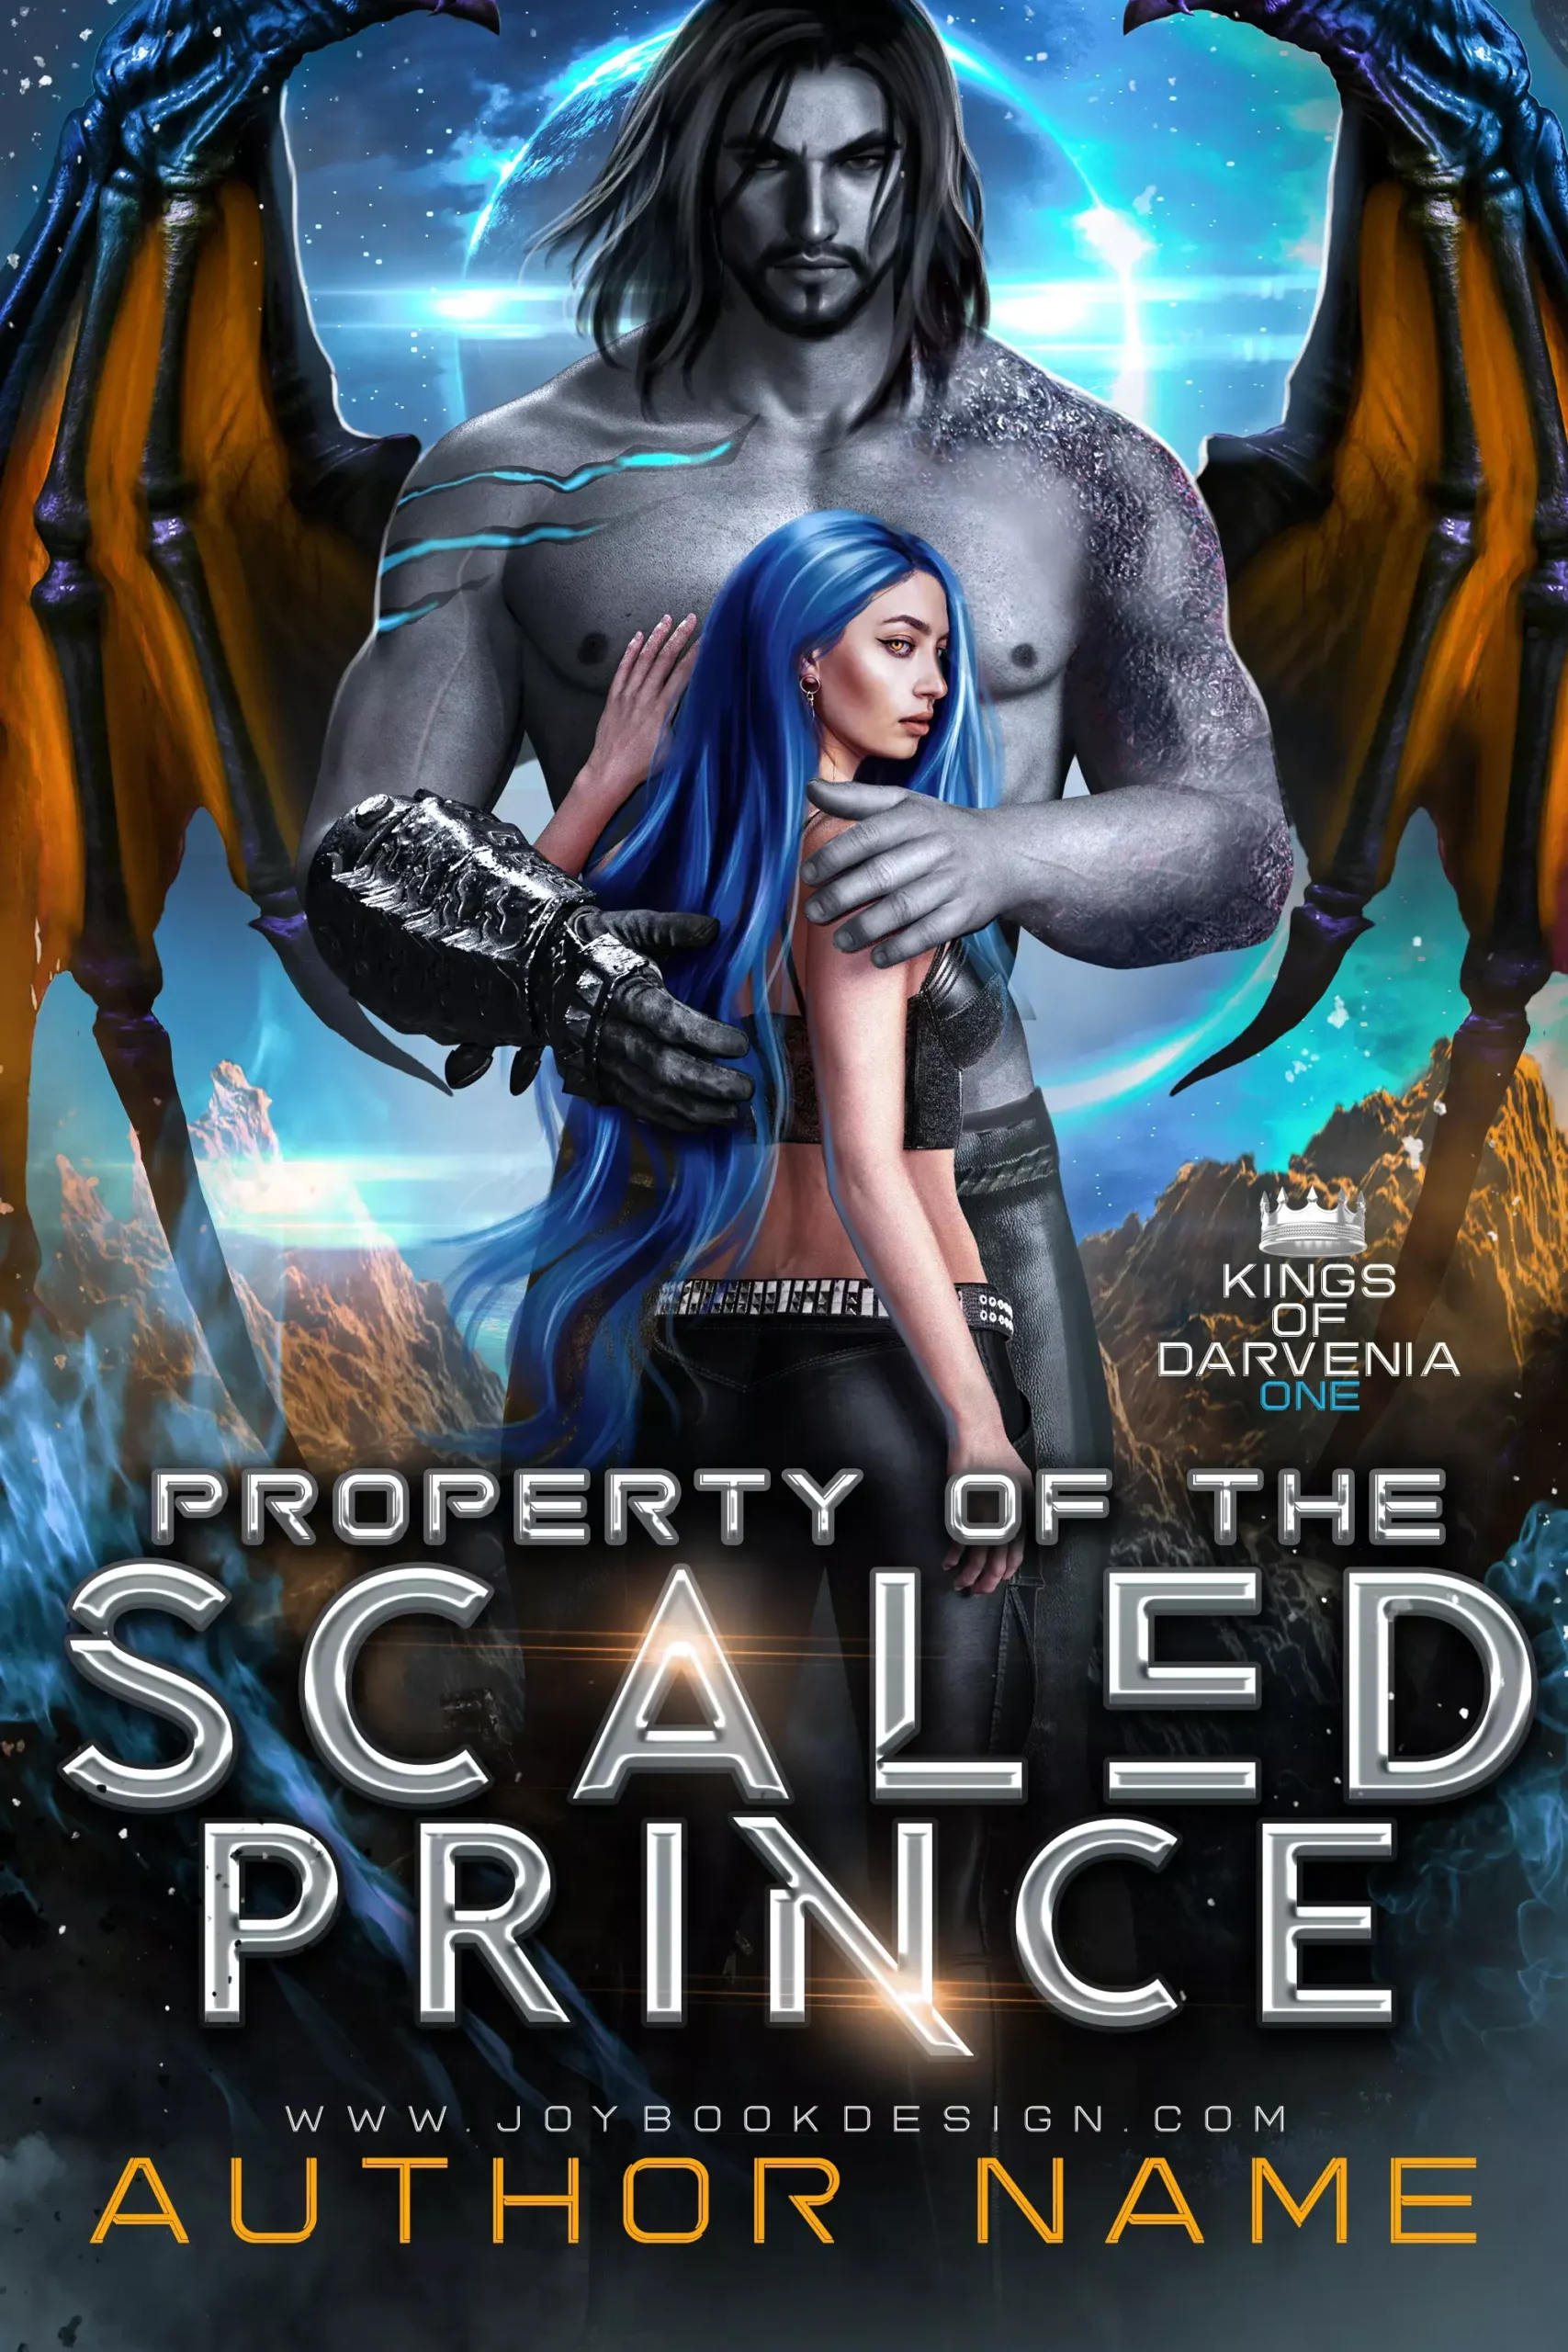 Property of the Scaled Prince